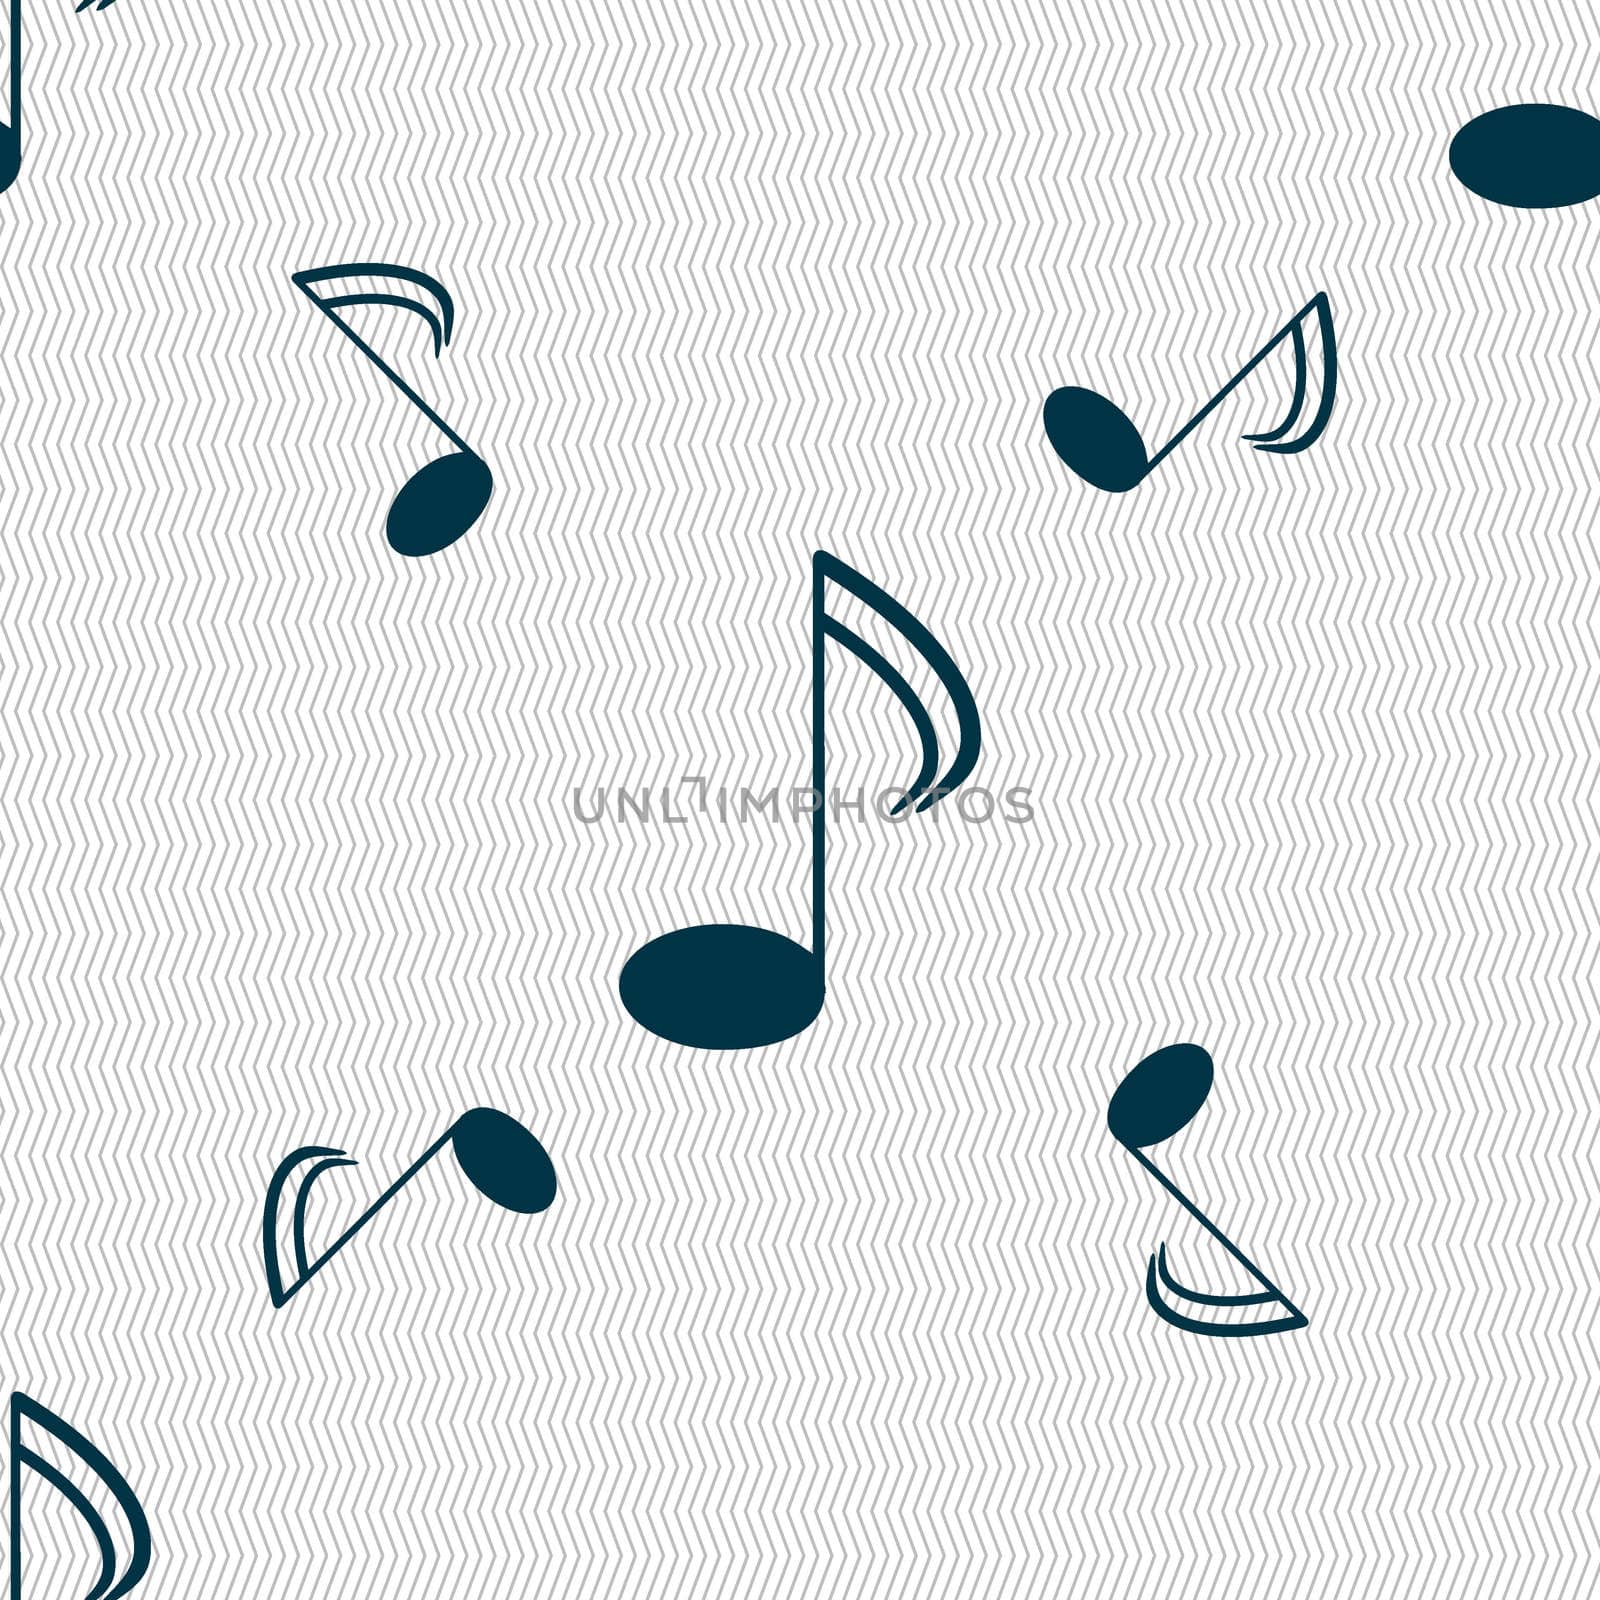 Music note sign icon. Musical symbol. Seamless pattern with geometric texture. illustration